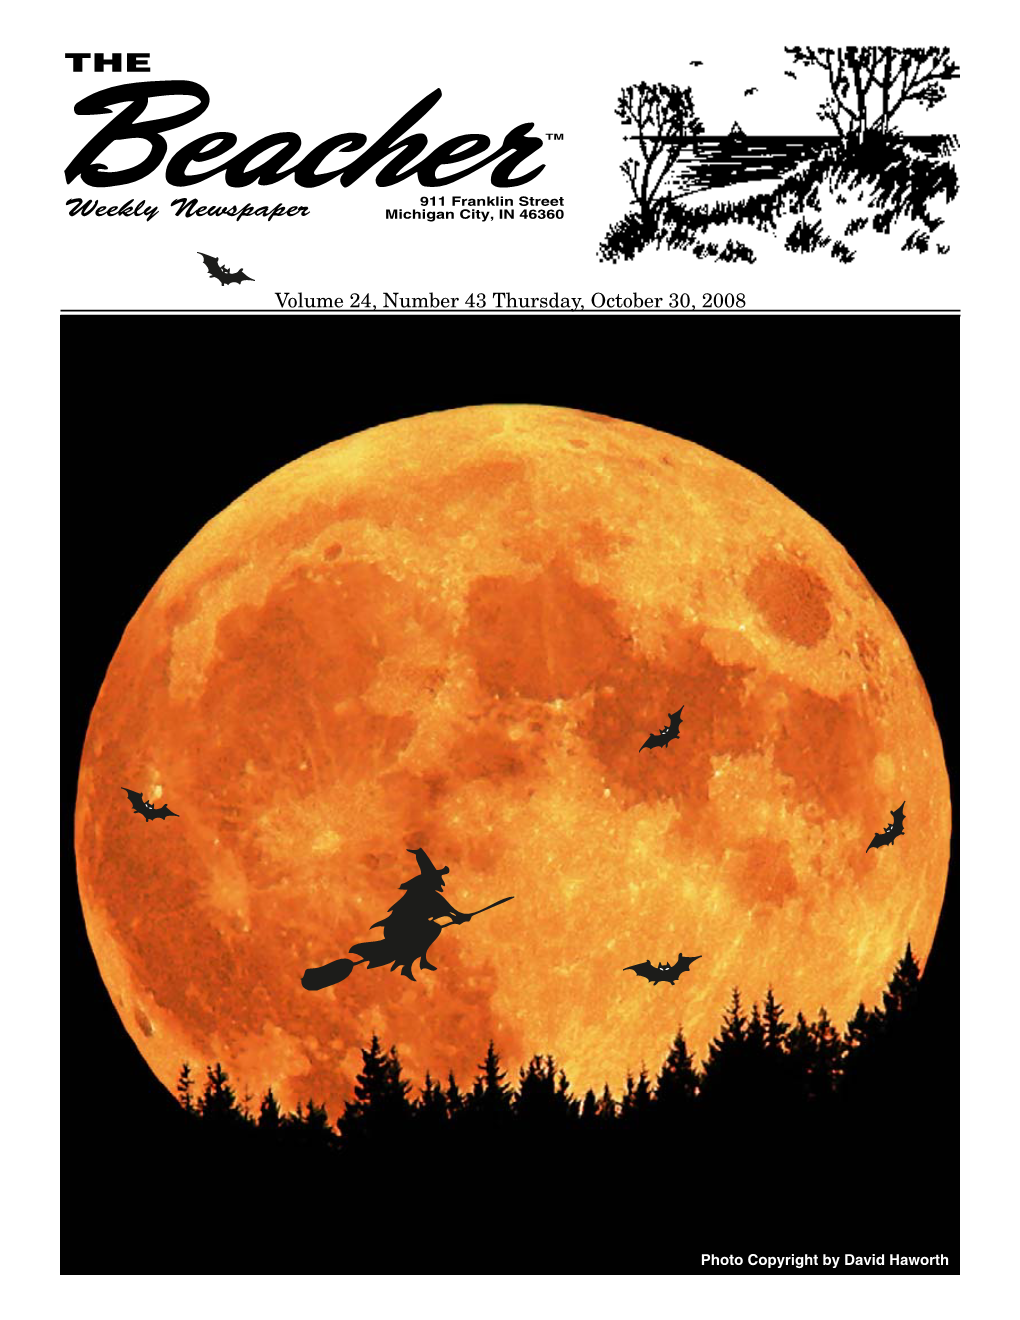 Halloween 08 Front Page Layout